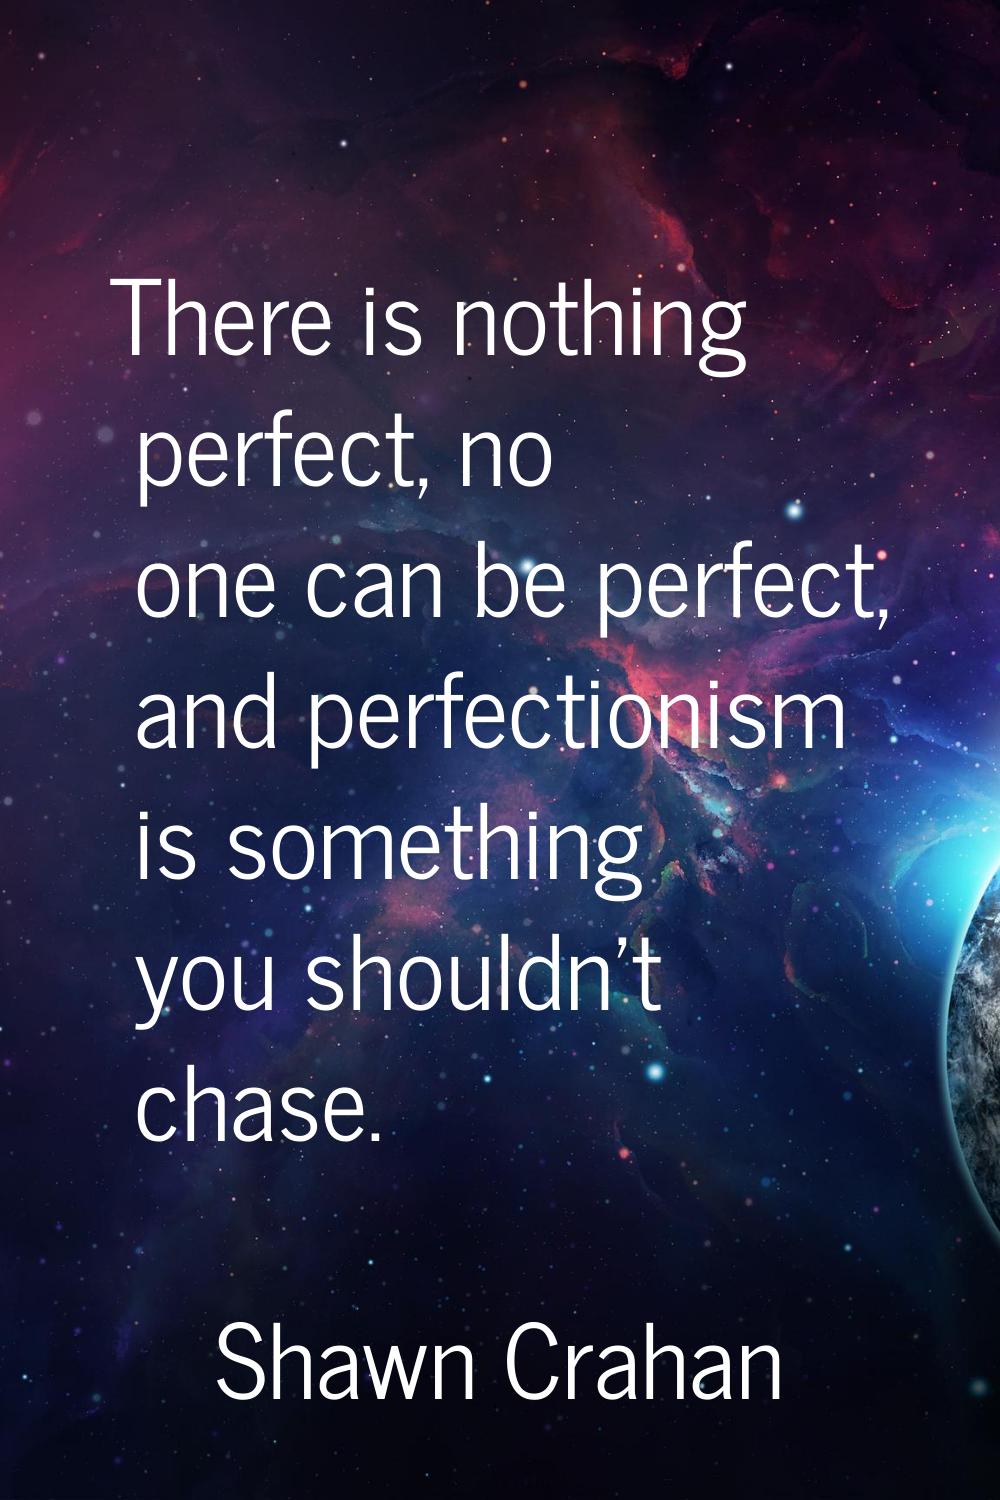 There is nothing perfect, no one can be perfect, and perfectionism is something you shouldn't chase